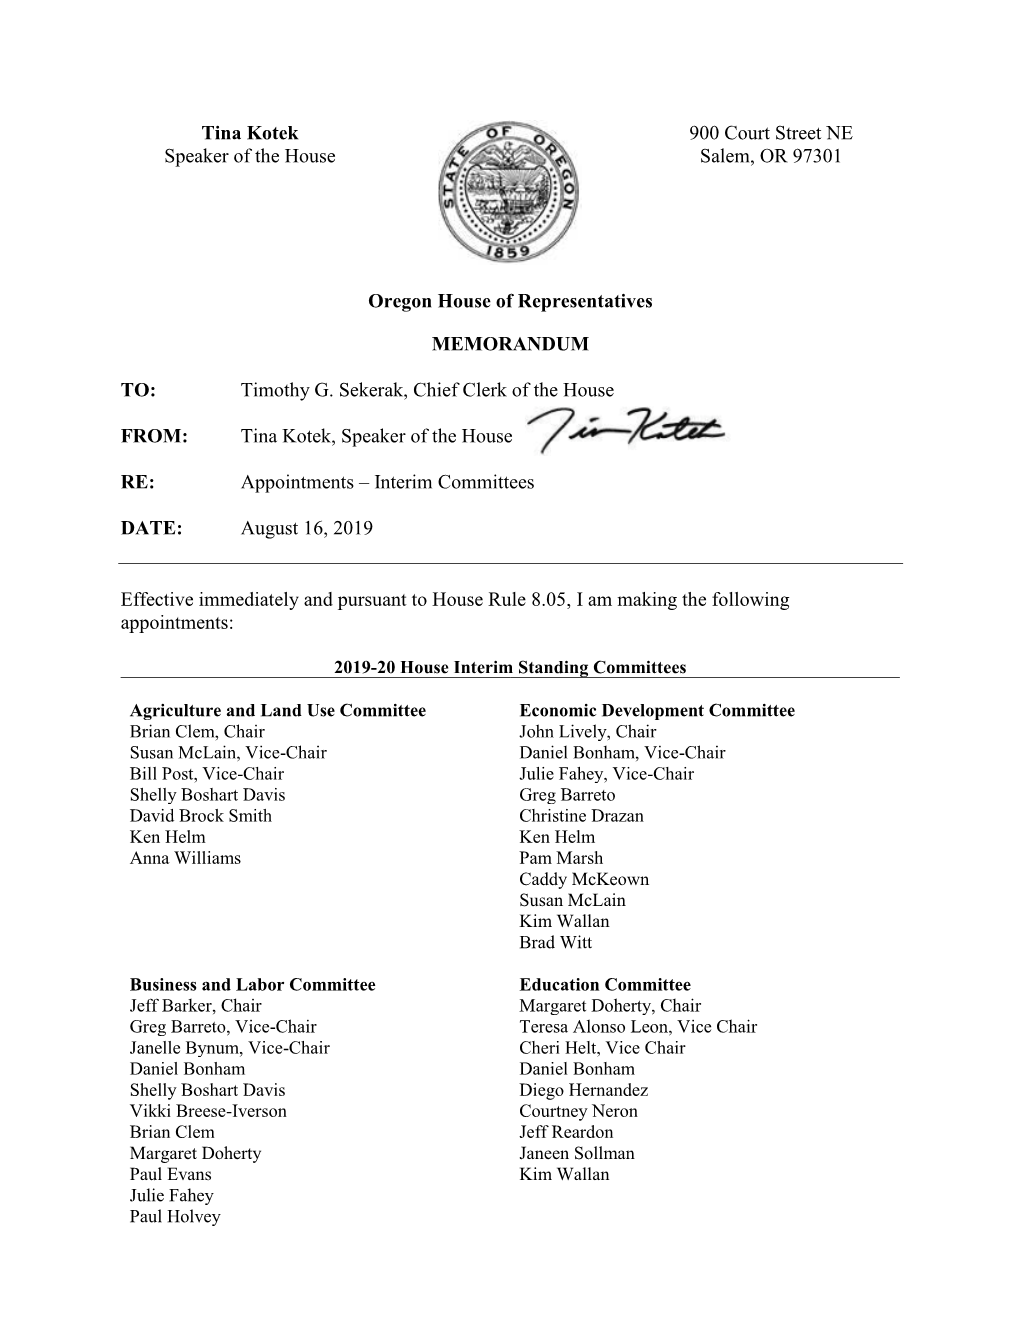 Speaker Appointments to Interim Committees